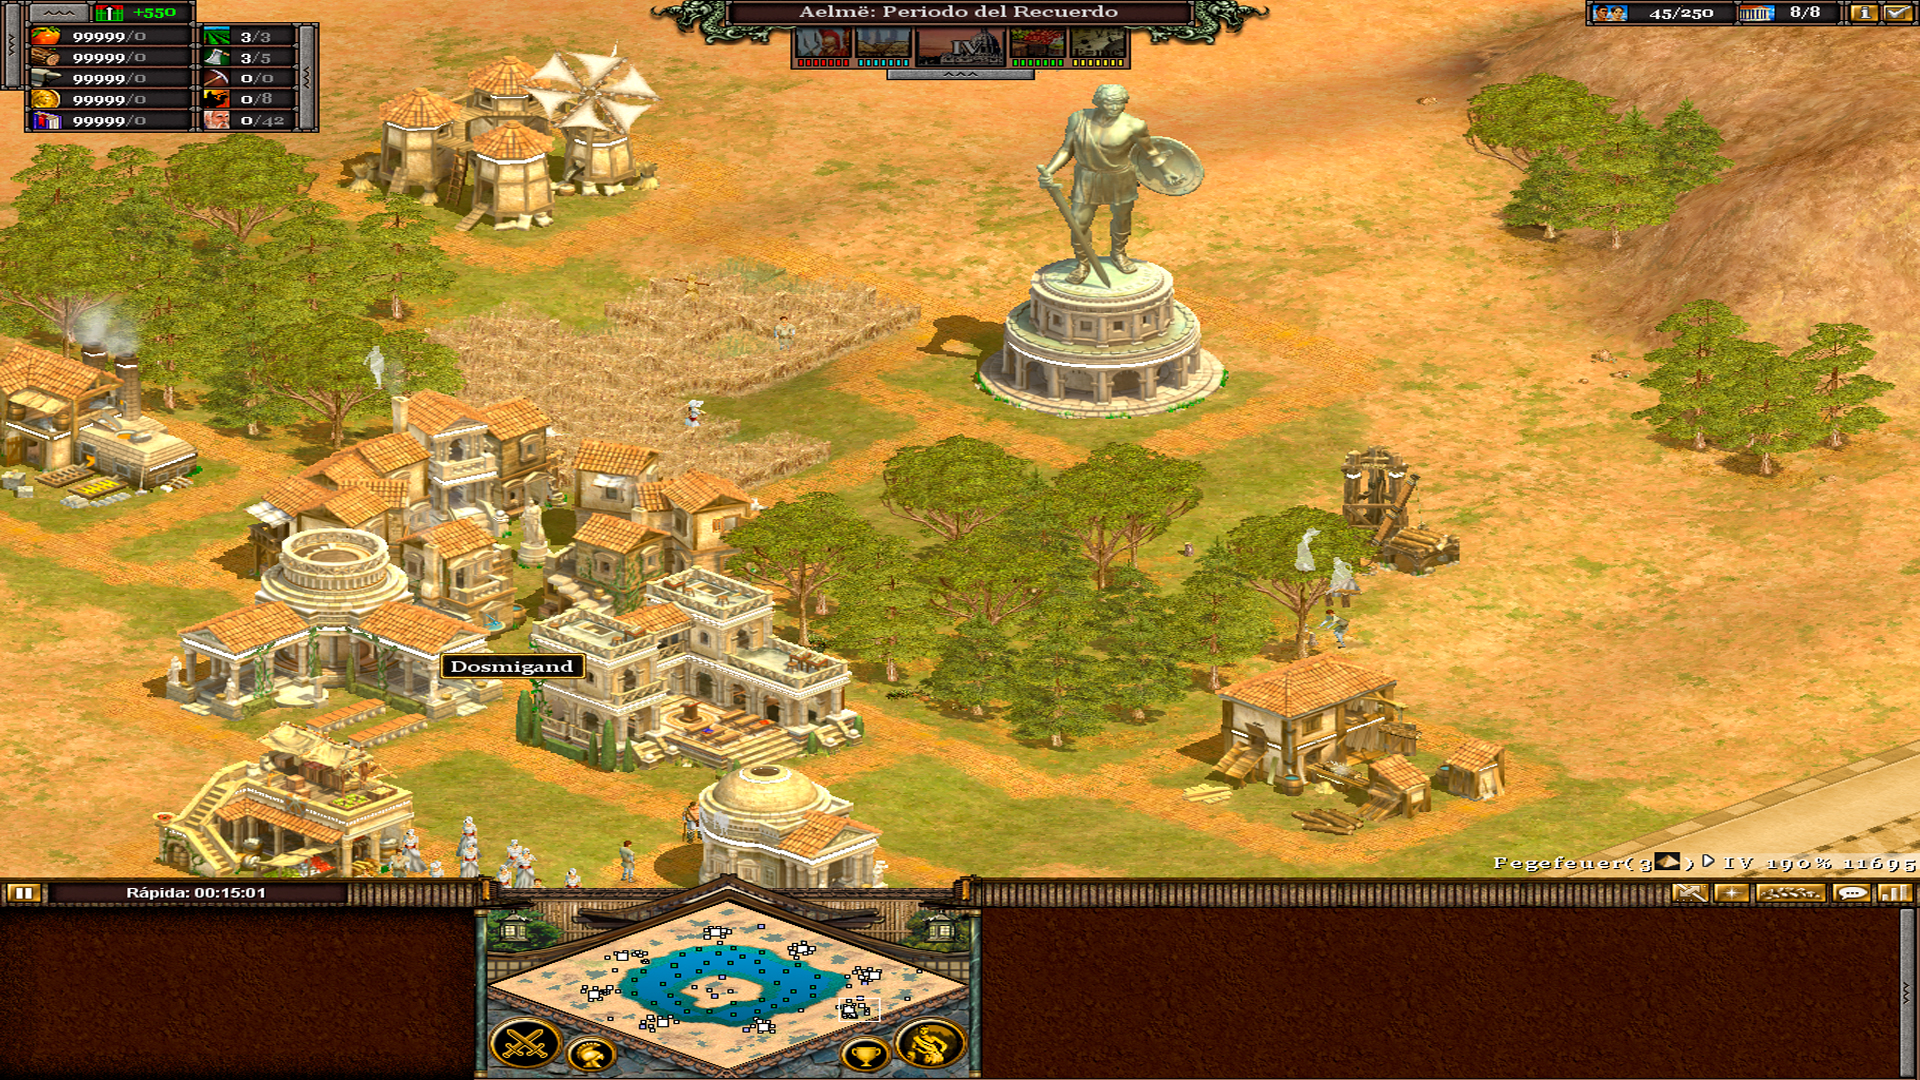 Rise of Nations: Thrones and Patriots PC Game - Free Download Full Version